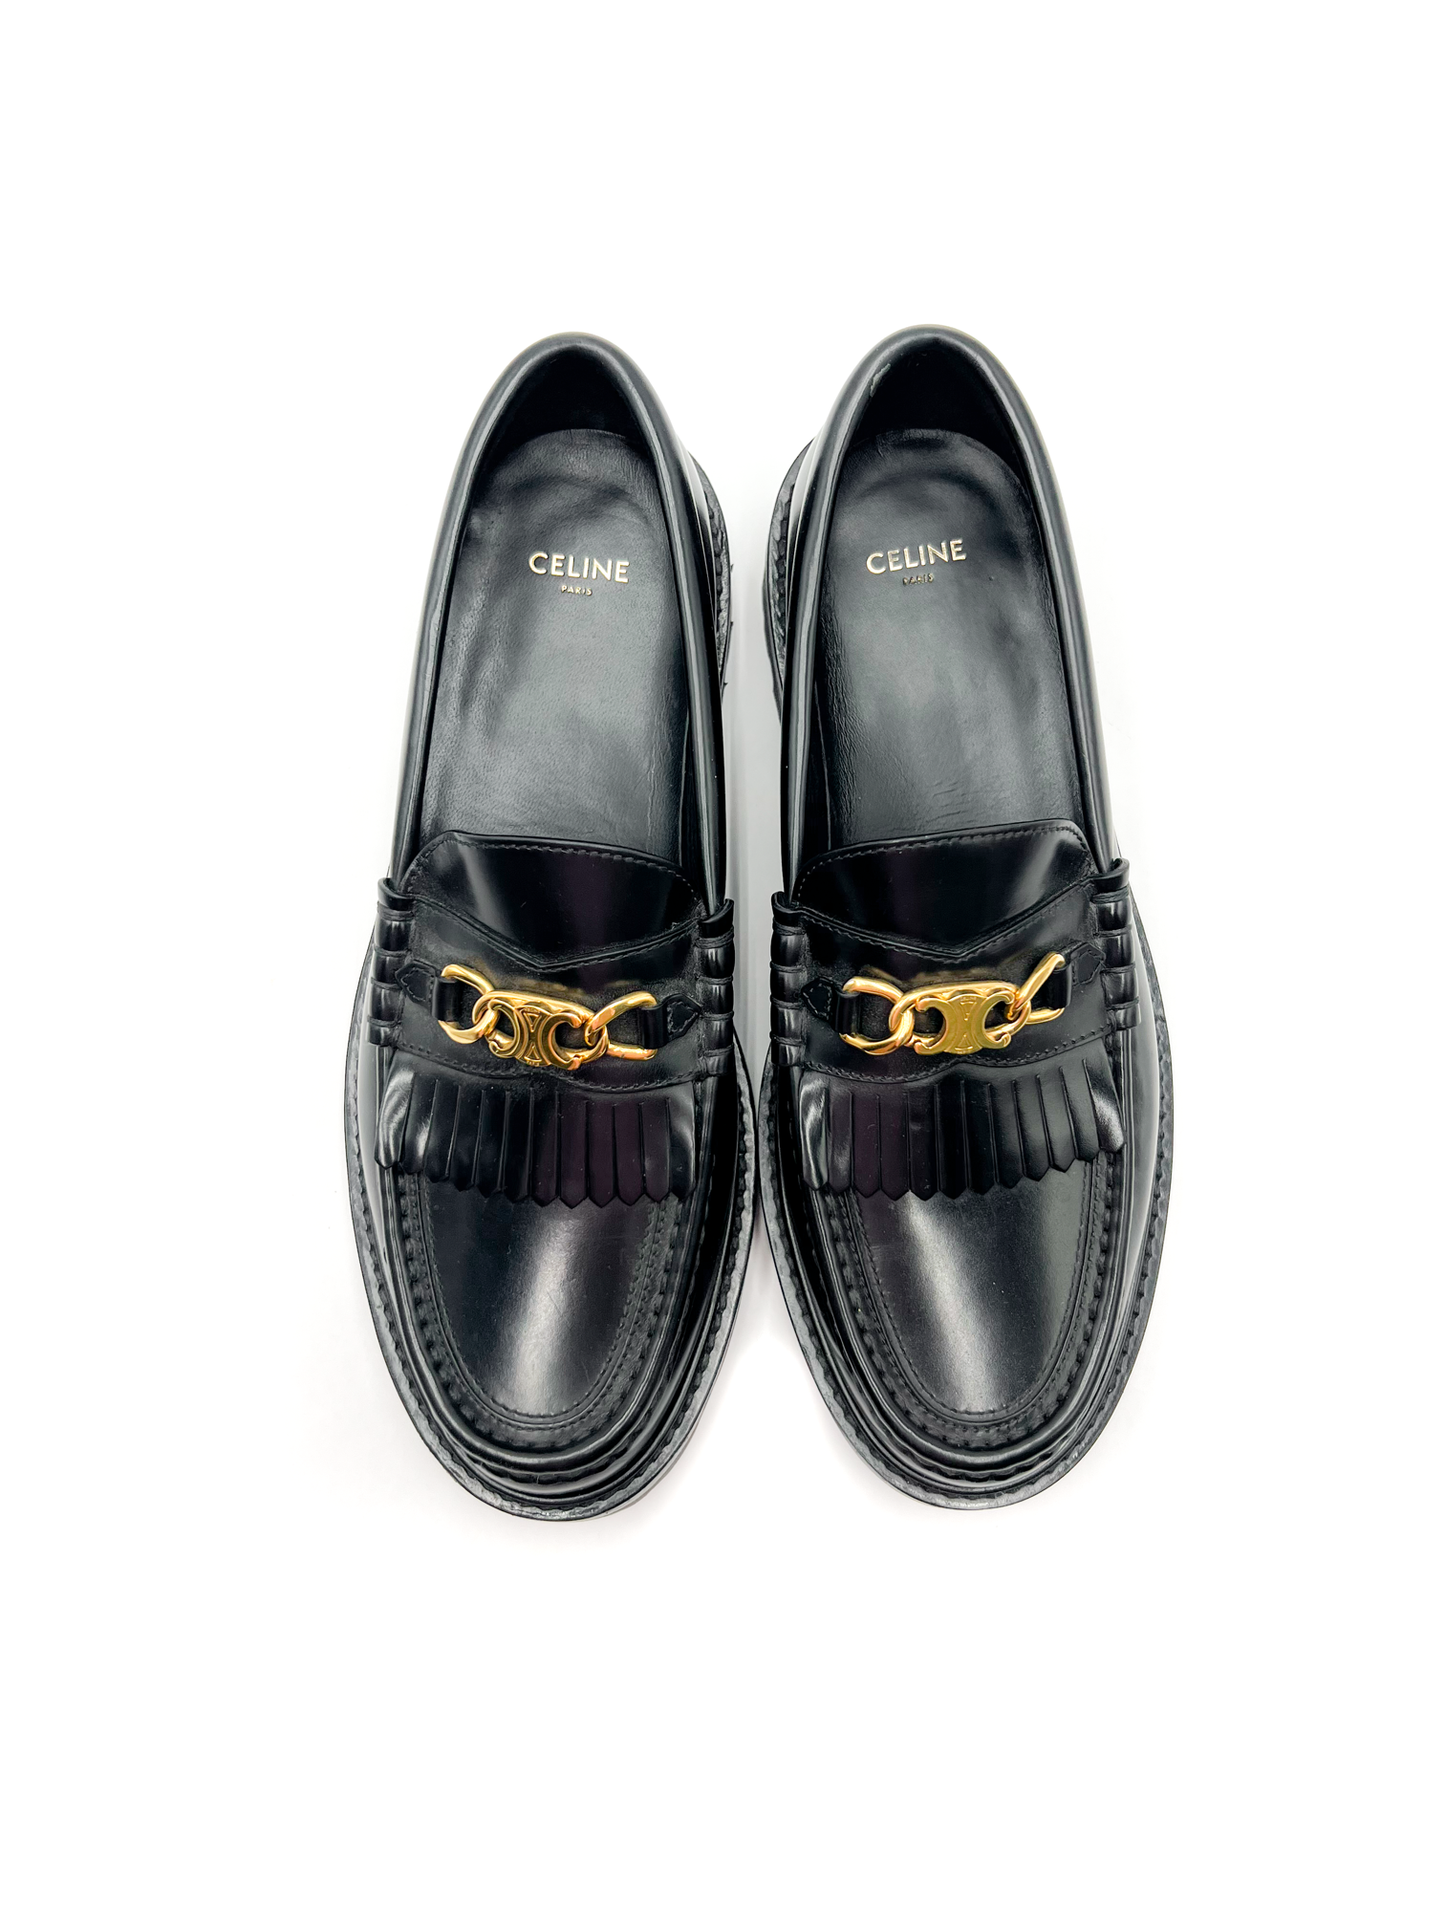 Celine Flat Triomphe Loafers